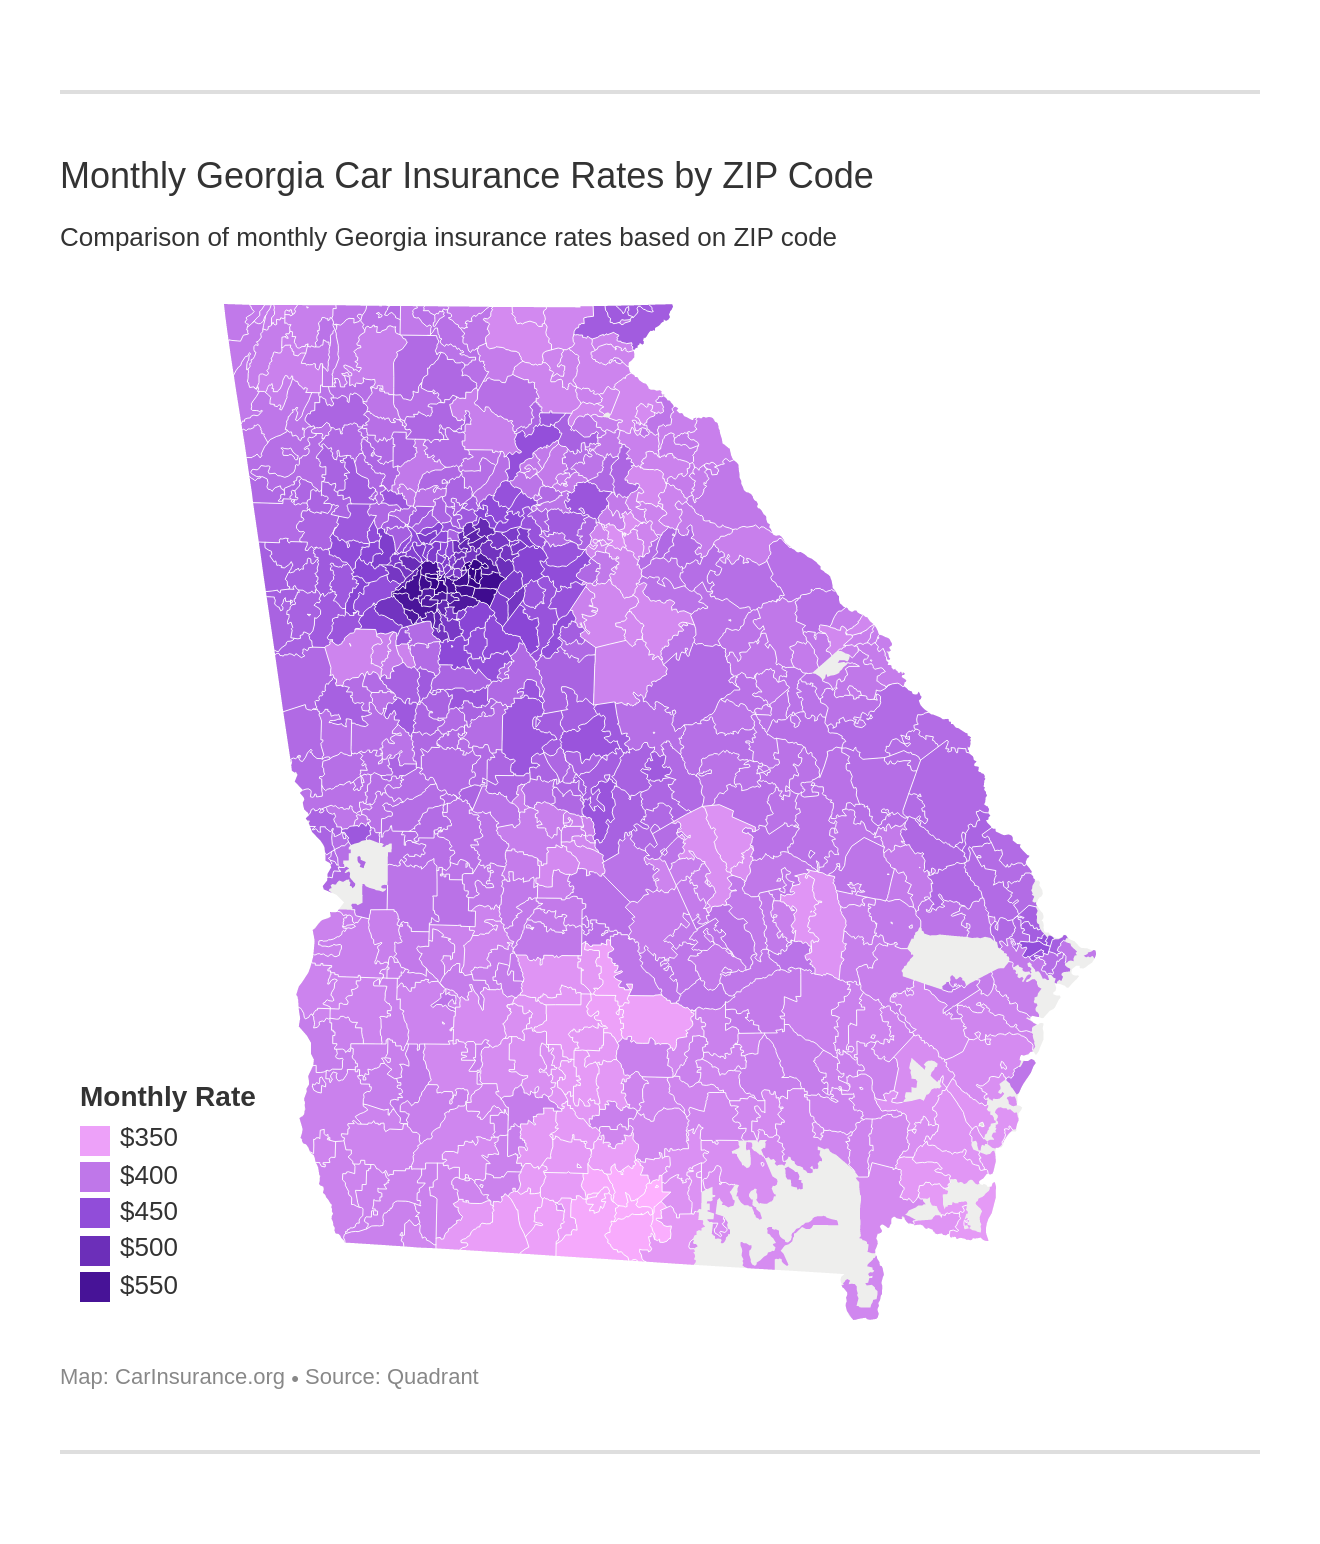 Monthly Georgia Car Insurance Rates by ZIP Code